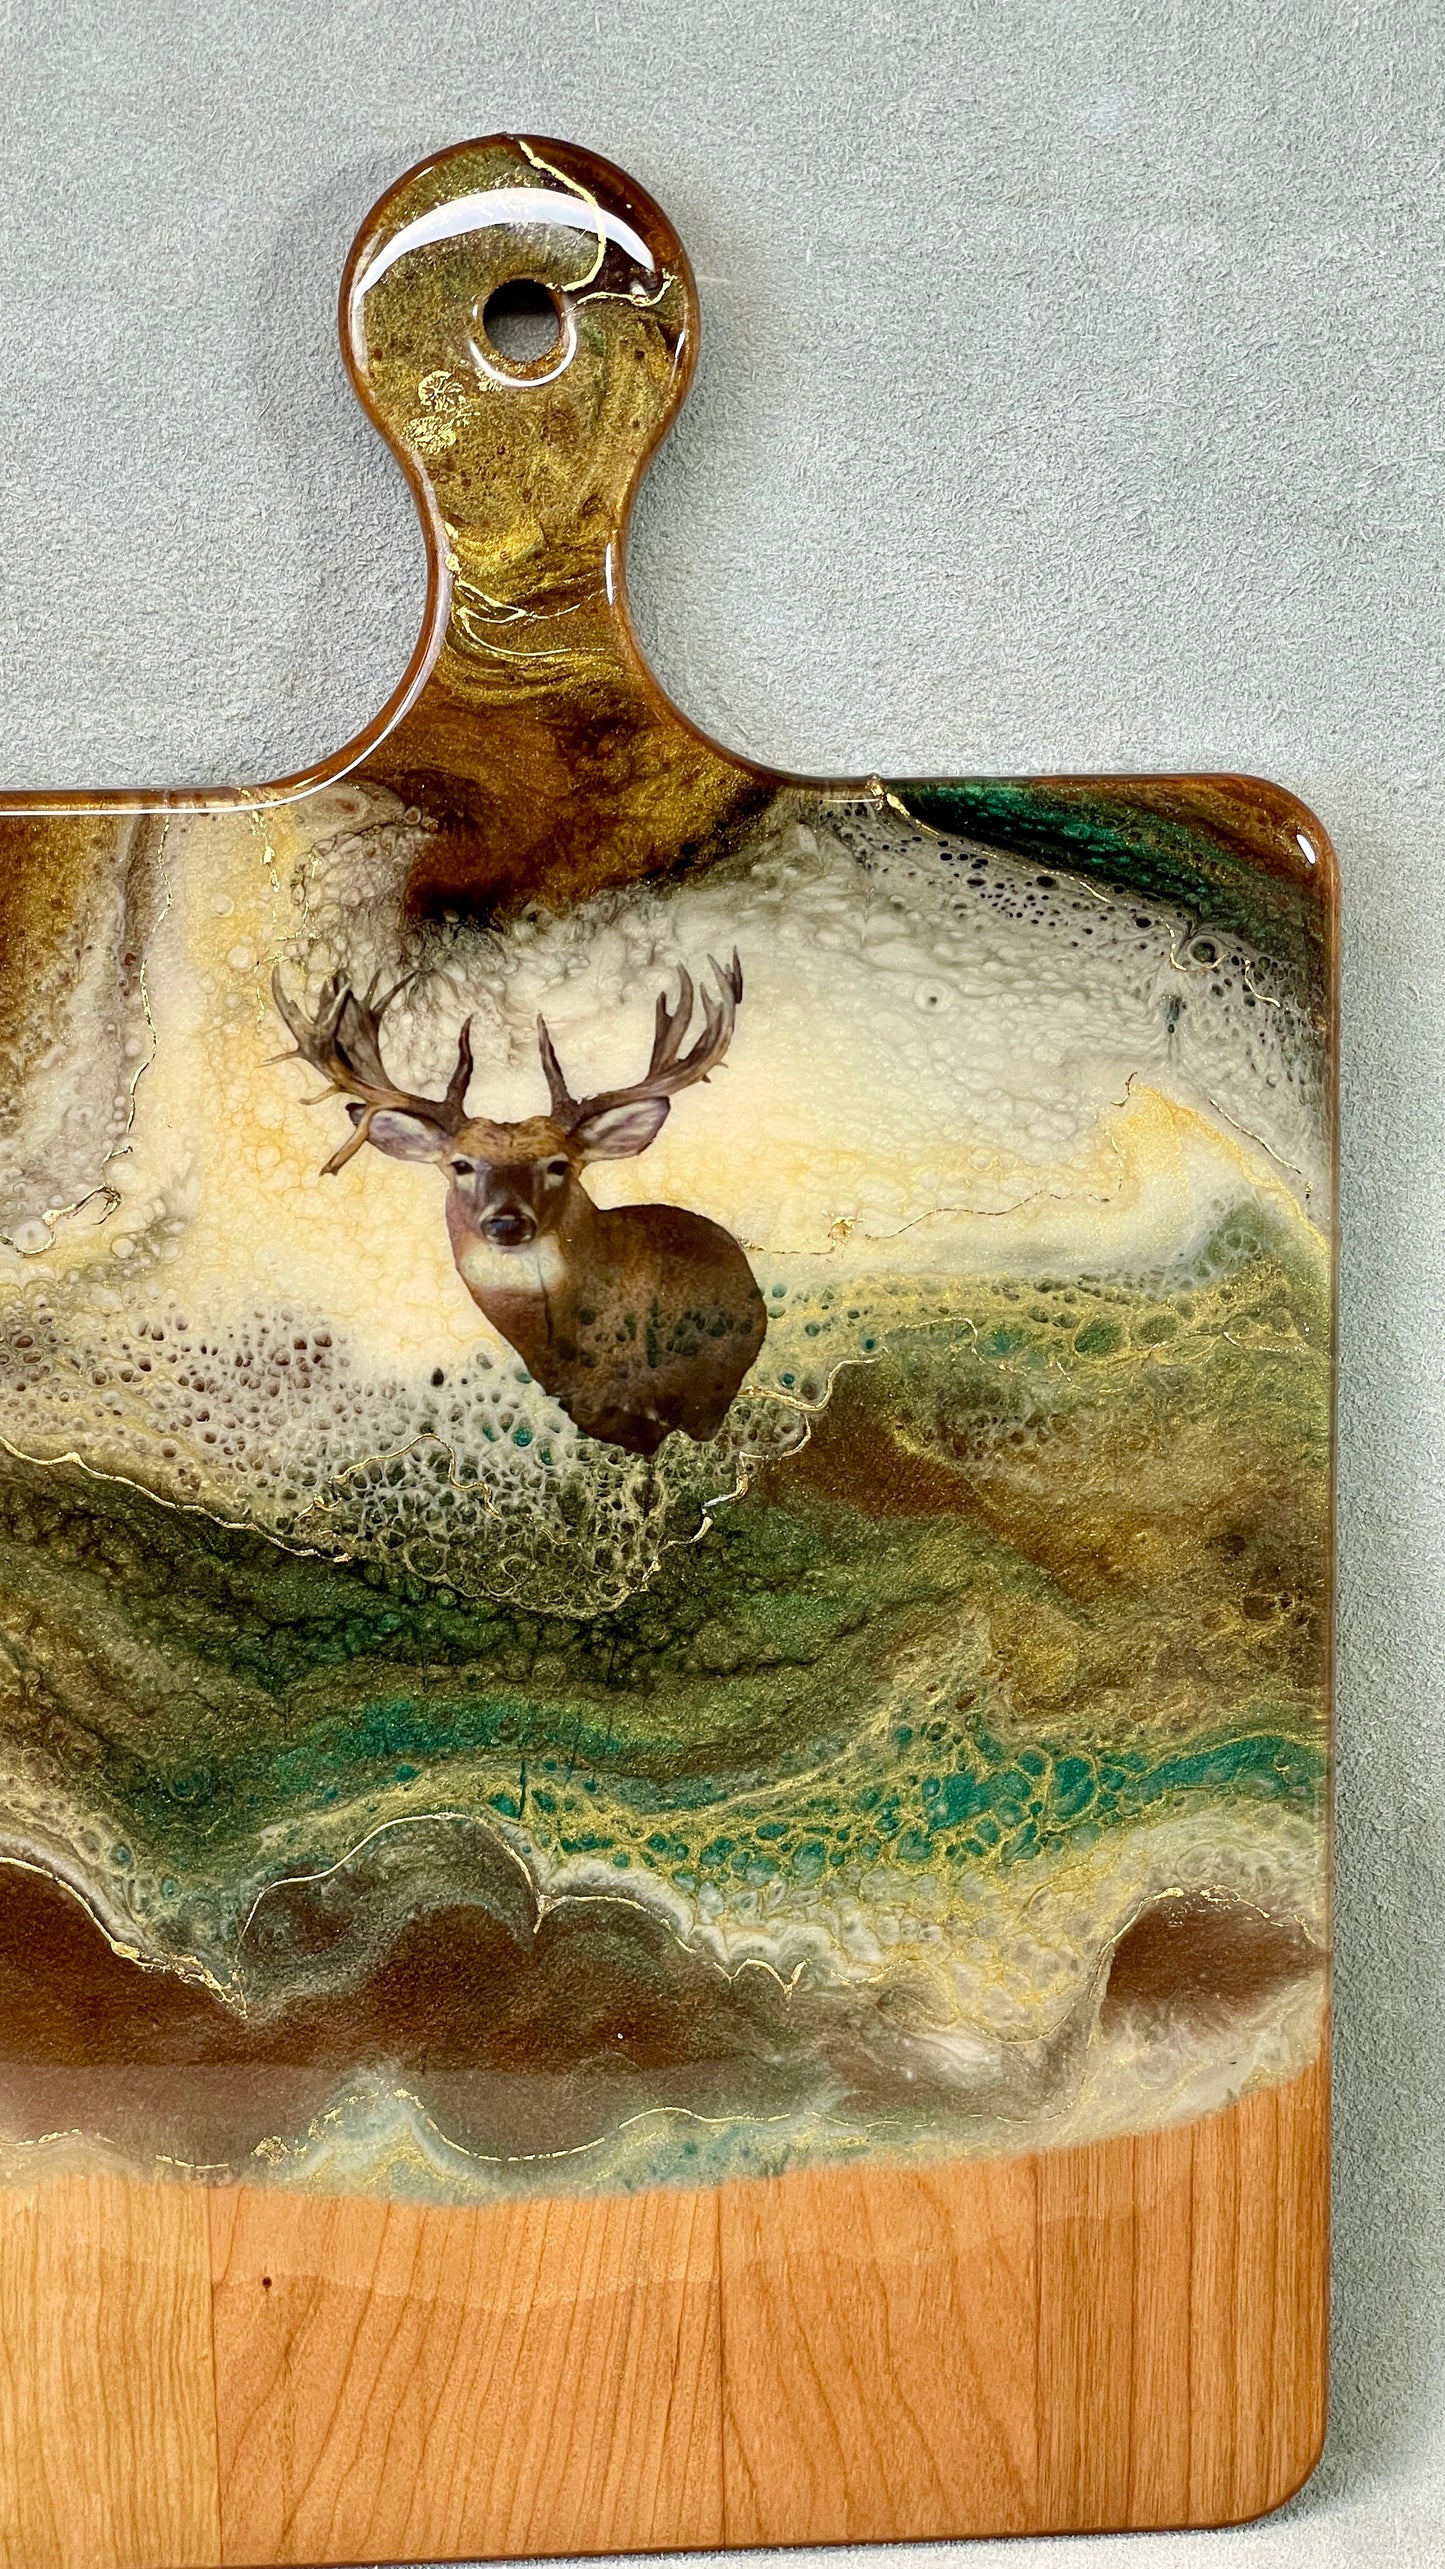 Handmade, sanded, and conditioned for functionality and longevity, this serving board was accented with original resin artwork and an decal of the large rack muledeer, by the artist herself, making it a true one-of-a-kind original piece that will showcase in your home beautifully. 